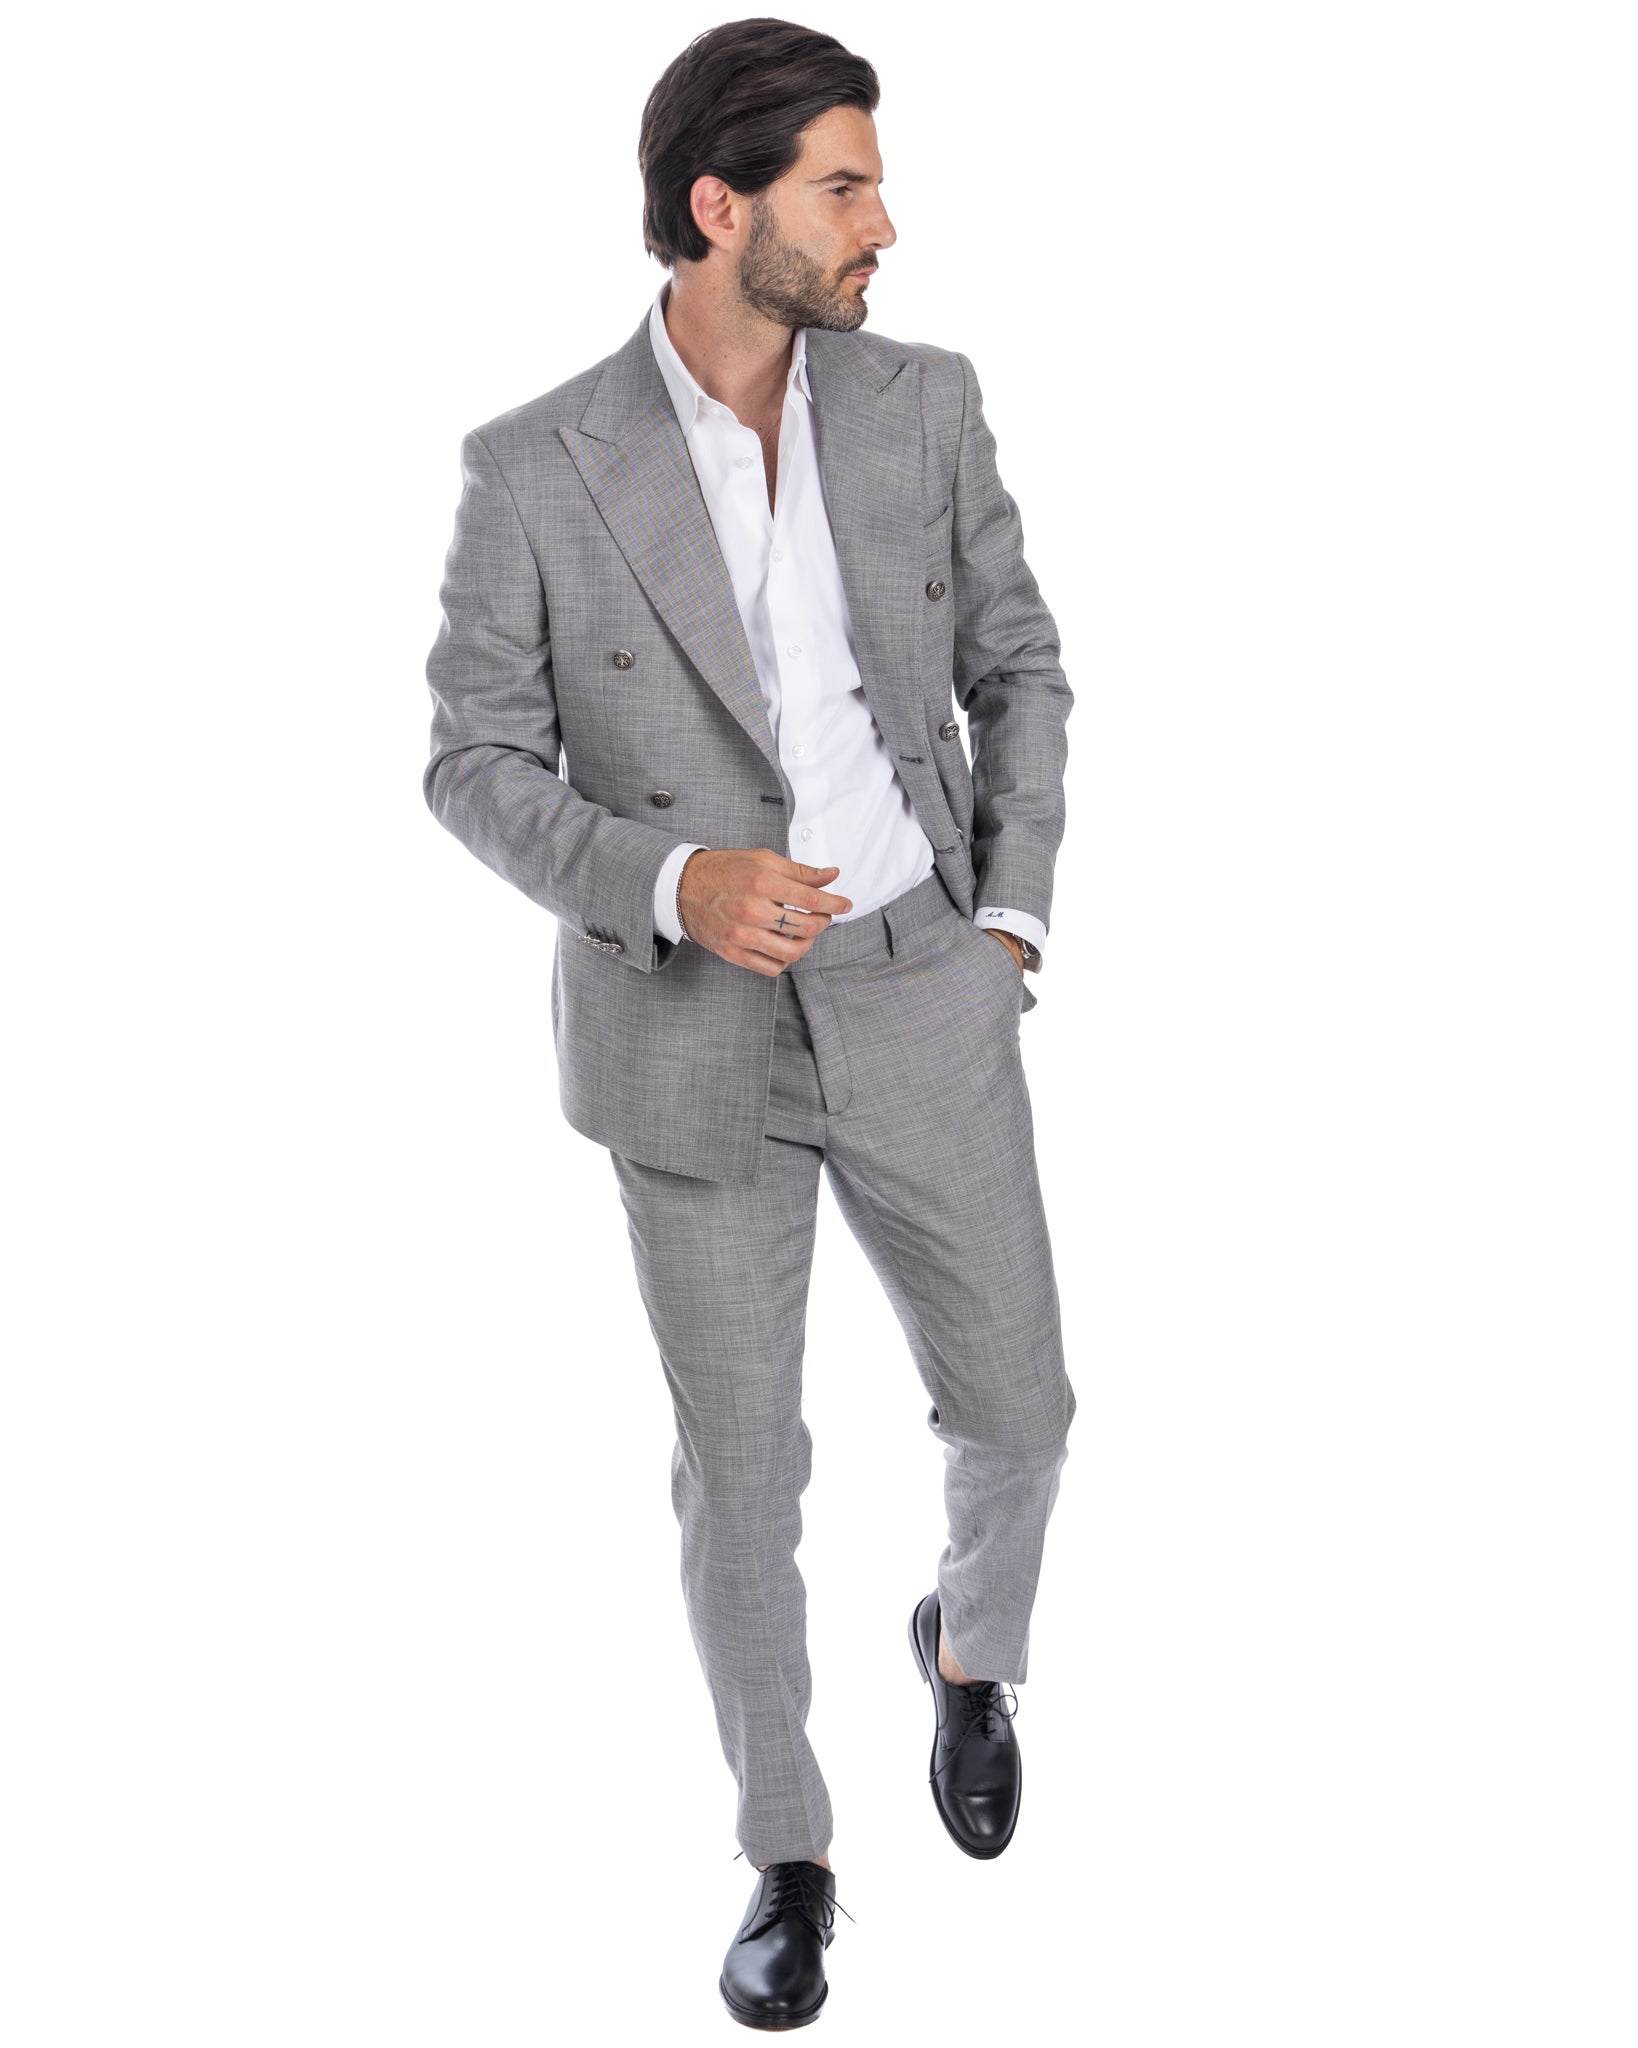 Thun - gray melange double-breasted suit